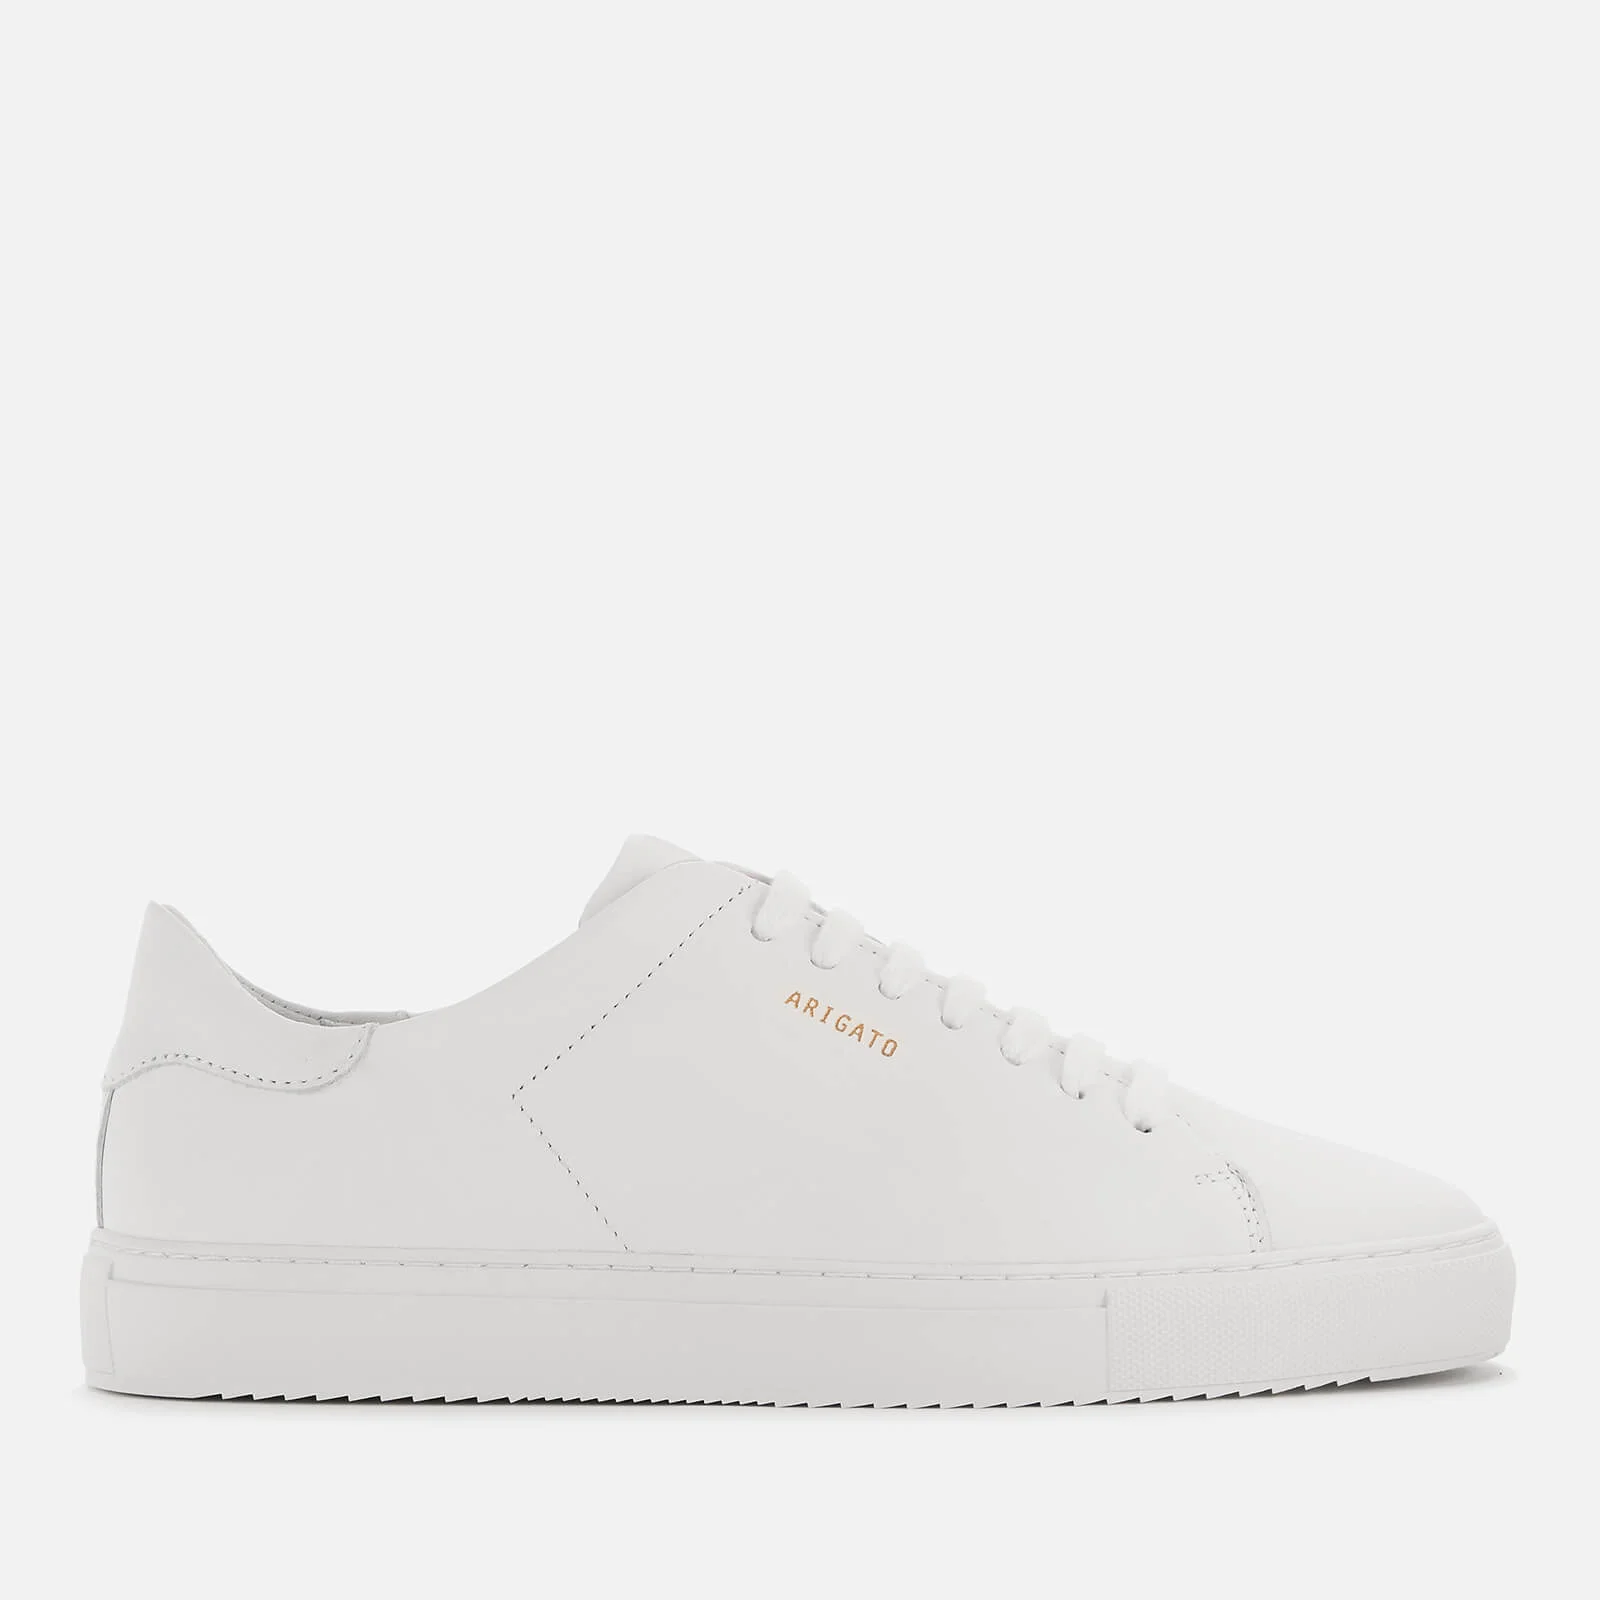 Axel Arigato Women's Clean 90 Leather Cupsole Trainers - White Image 1